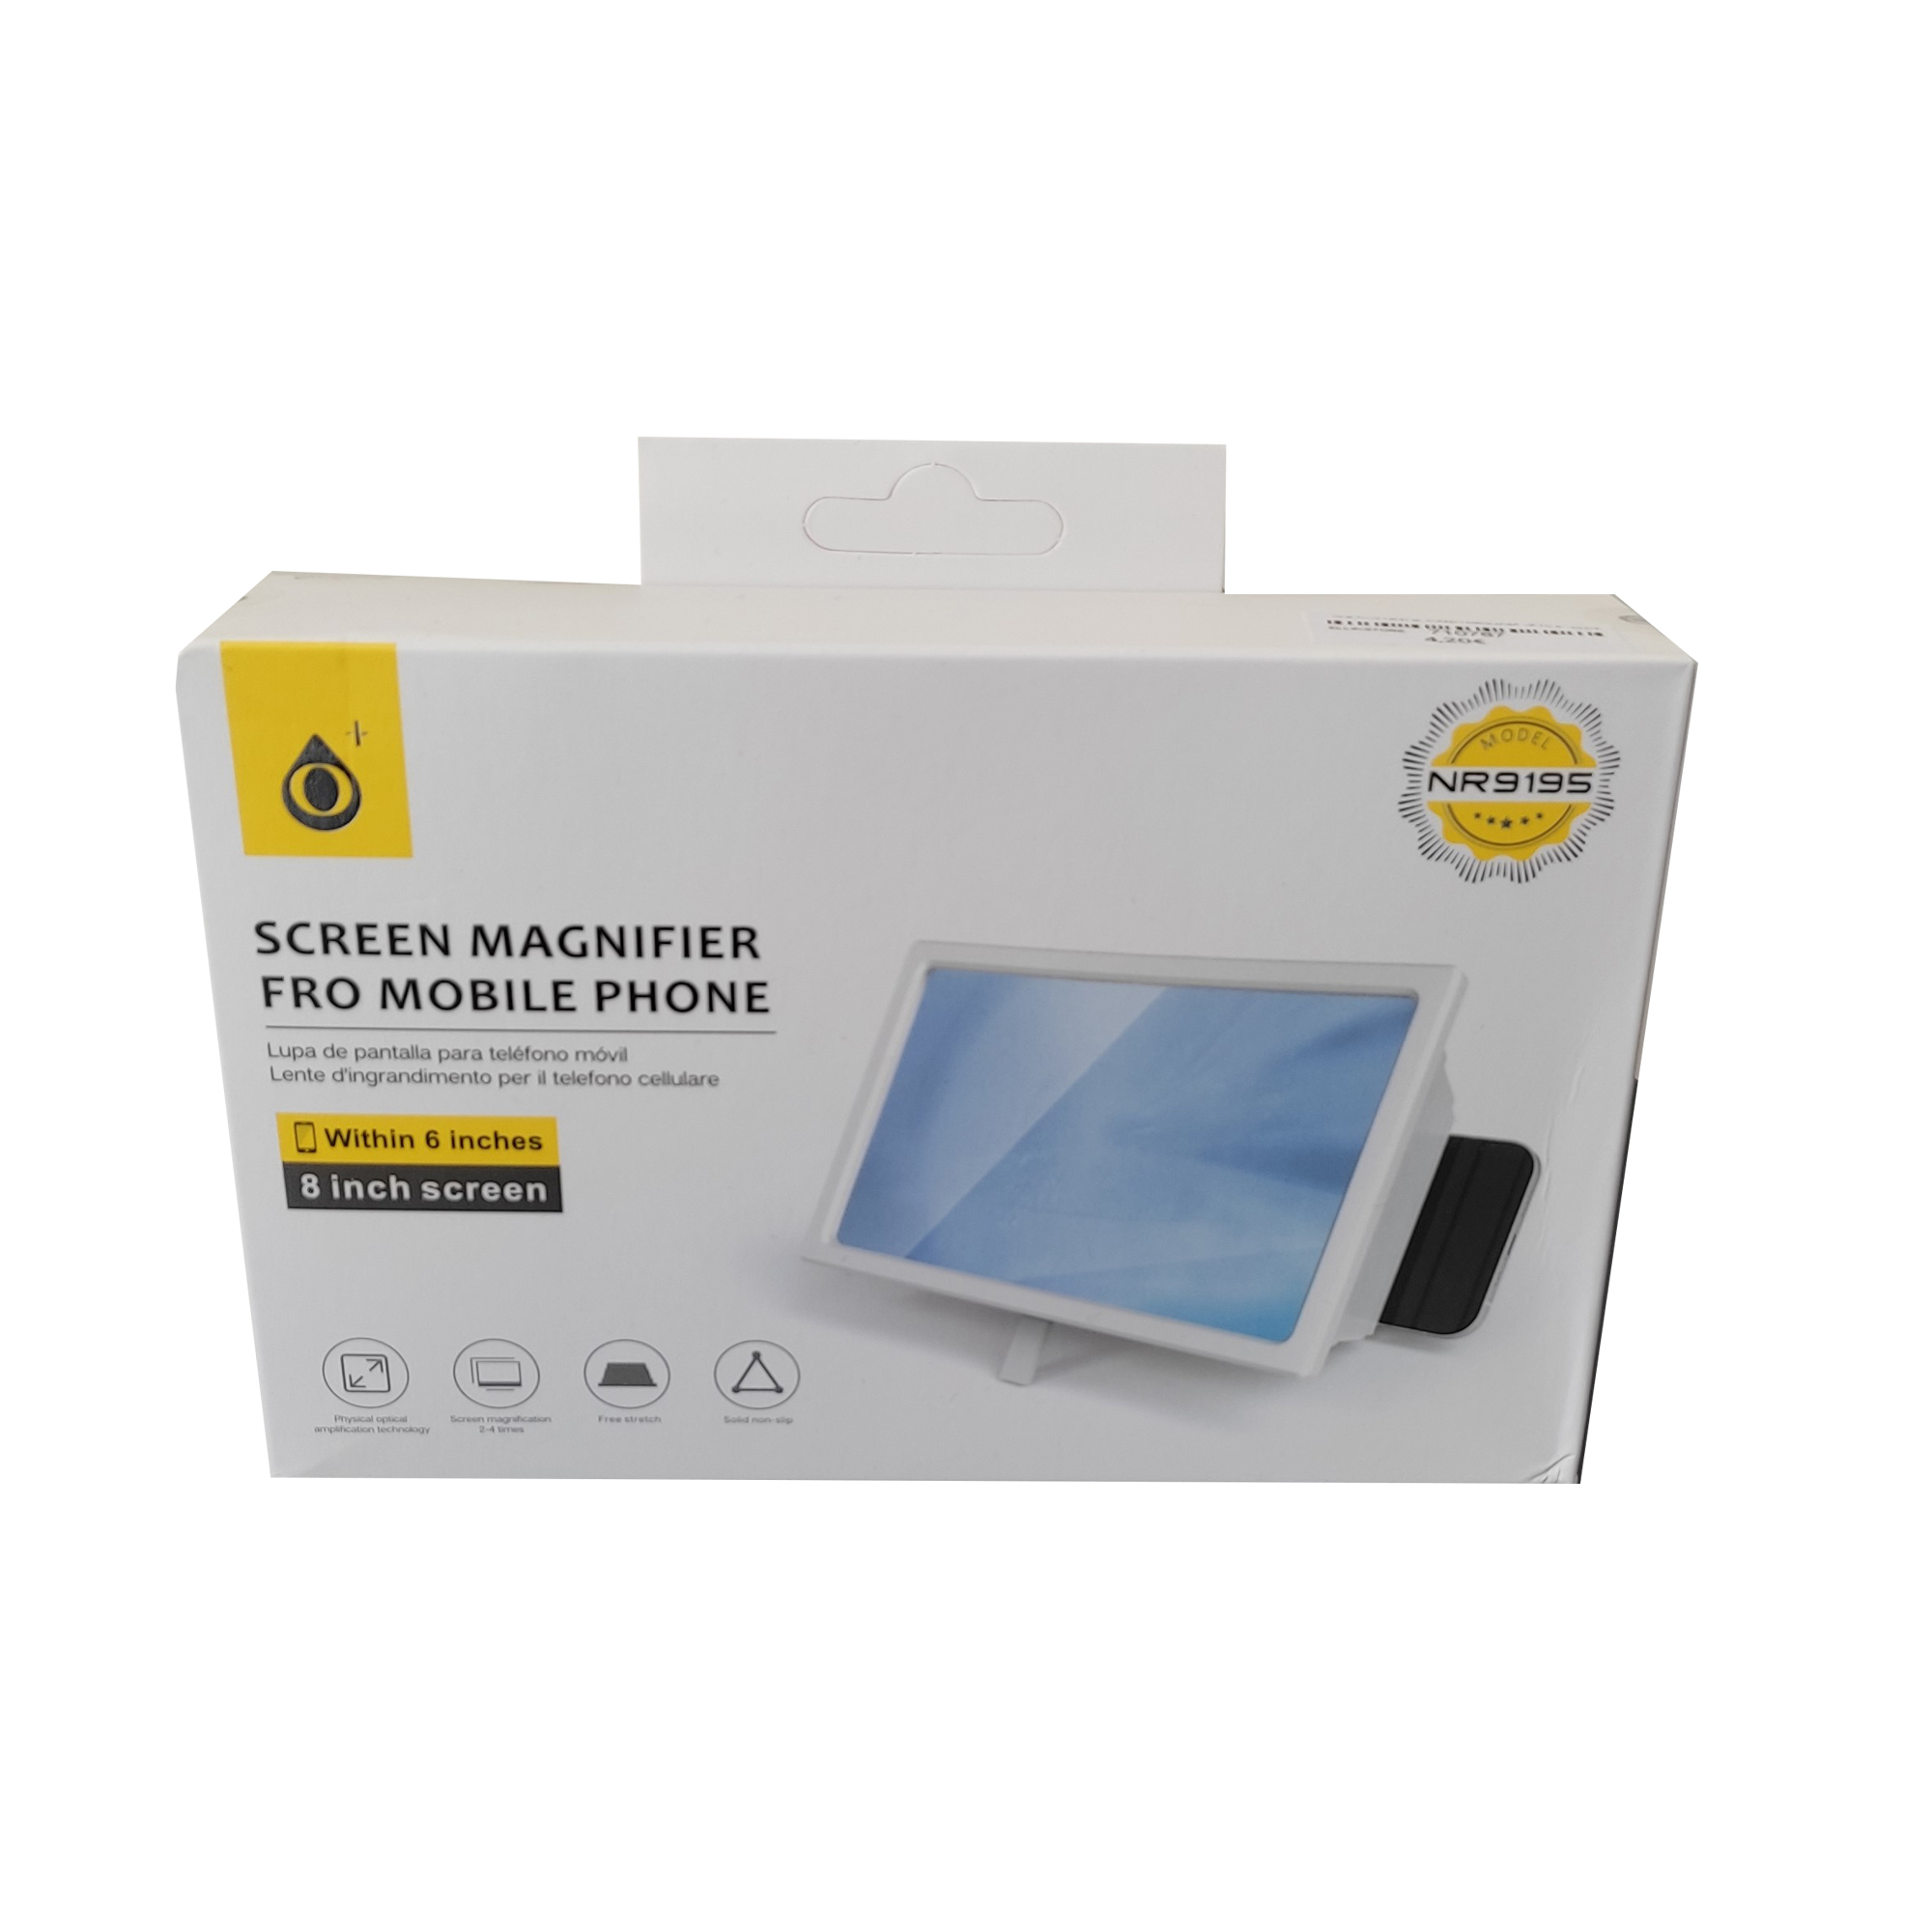 One plus NR9195 Screen Magnifier Up to 6” White – 710787_3